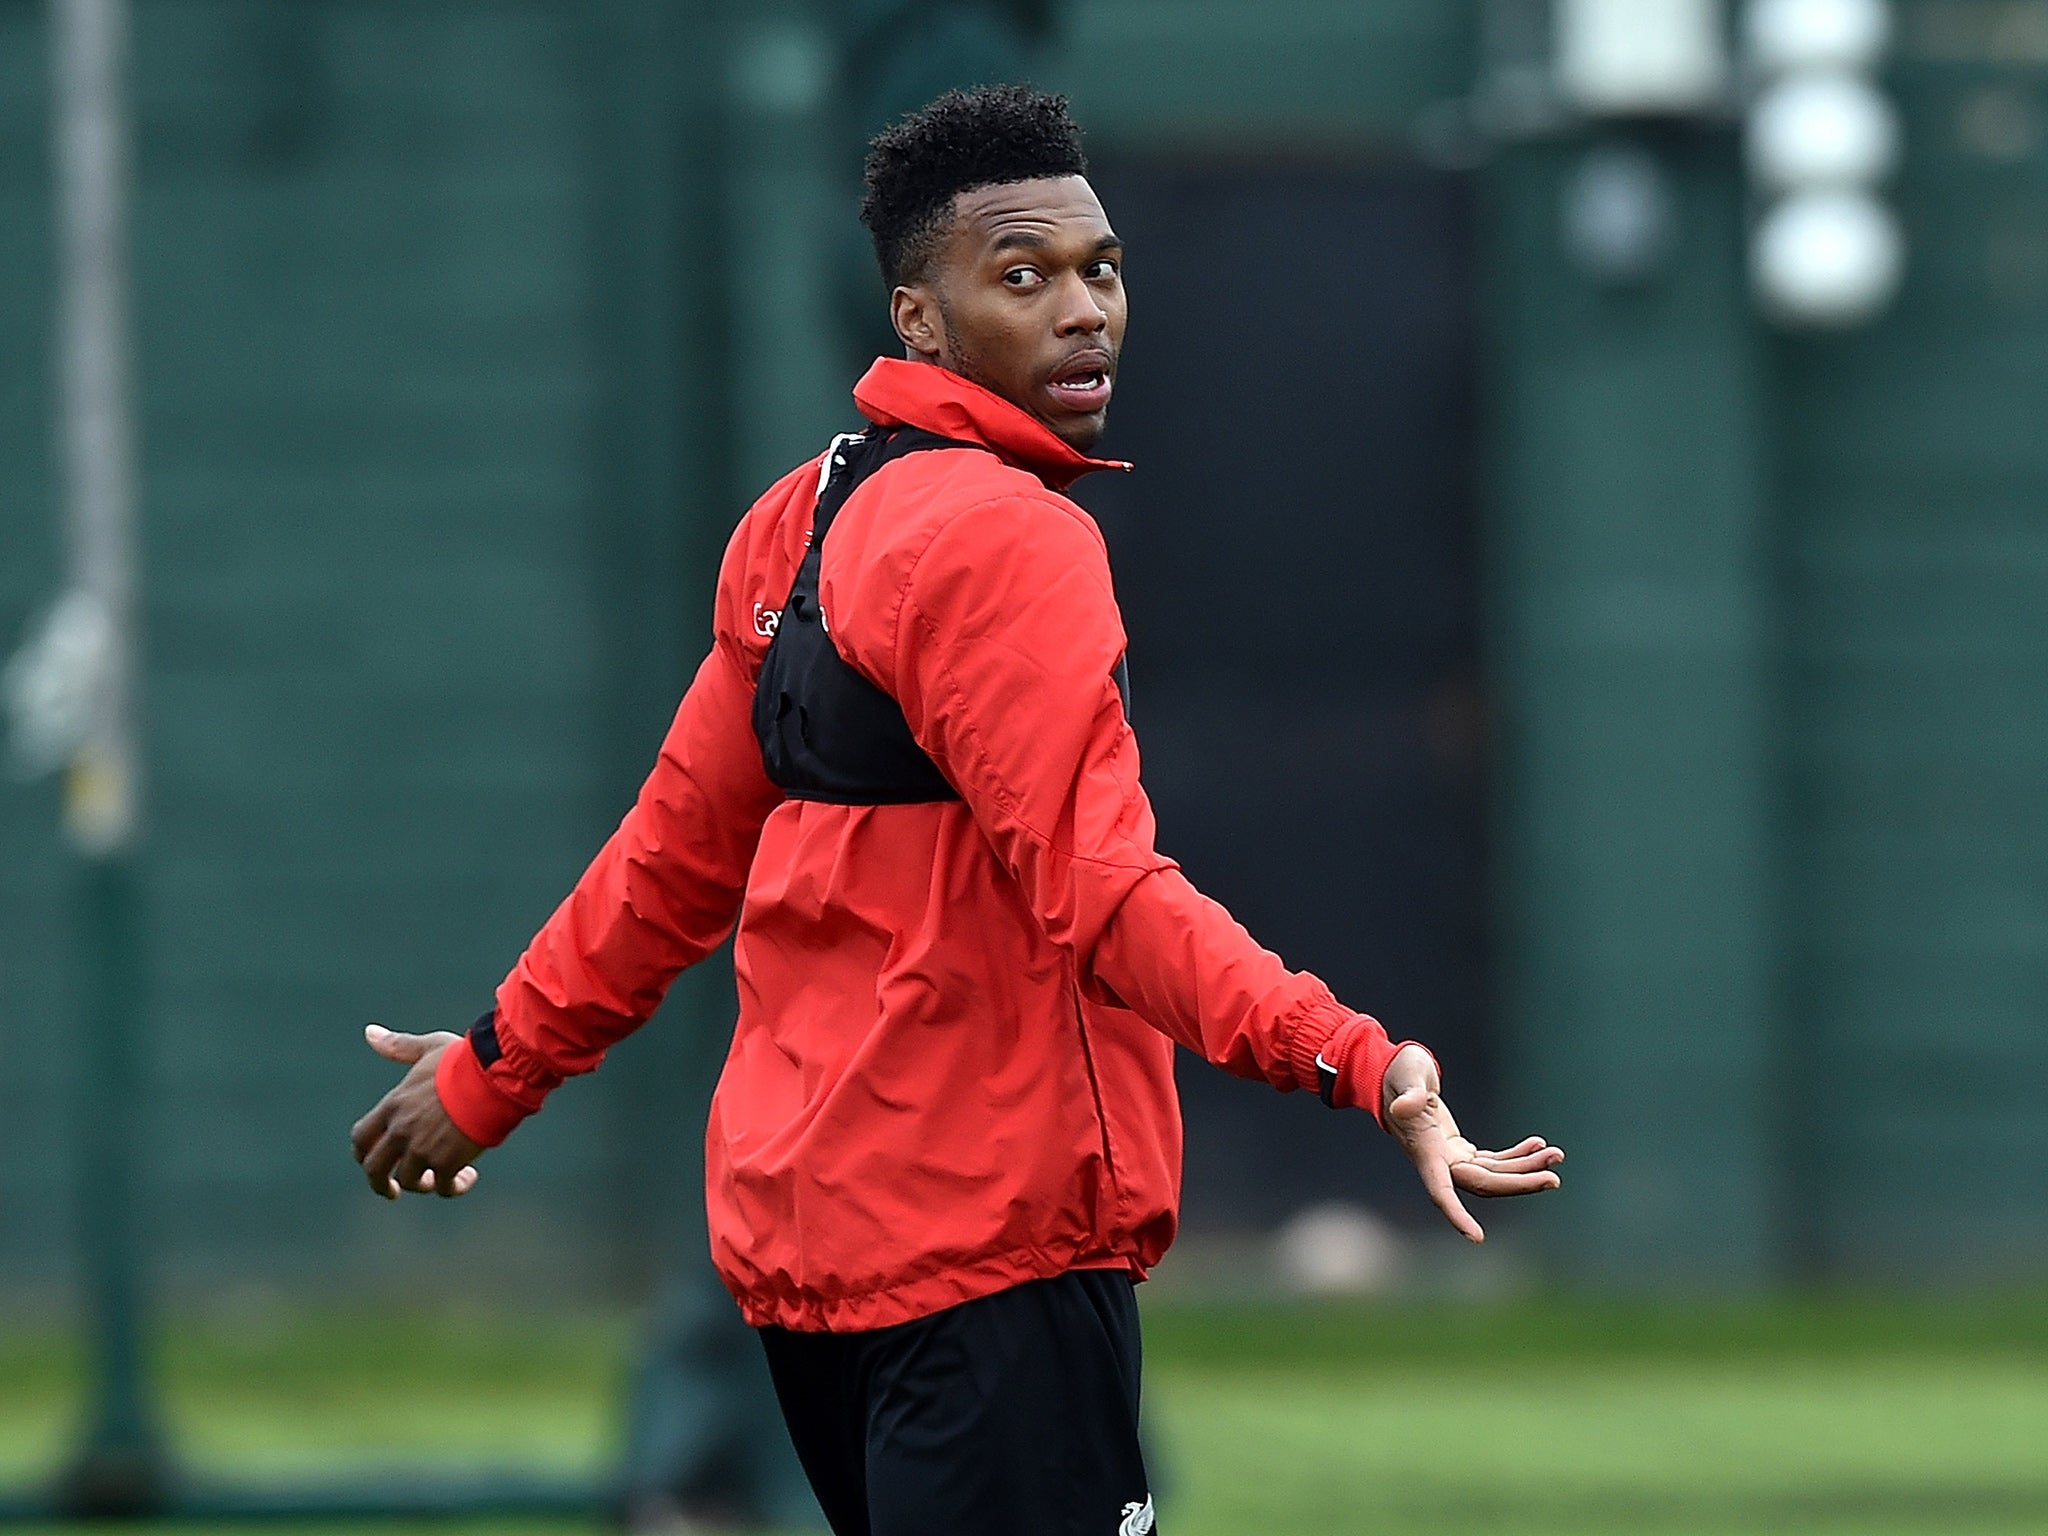 Sturridge is keen to play as much as possible under Klopp